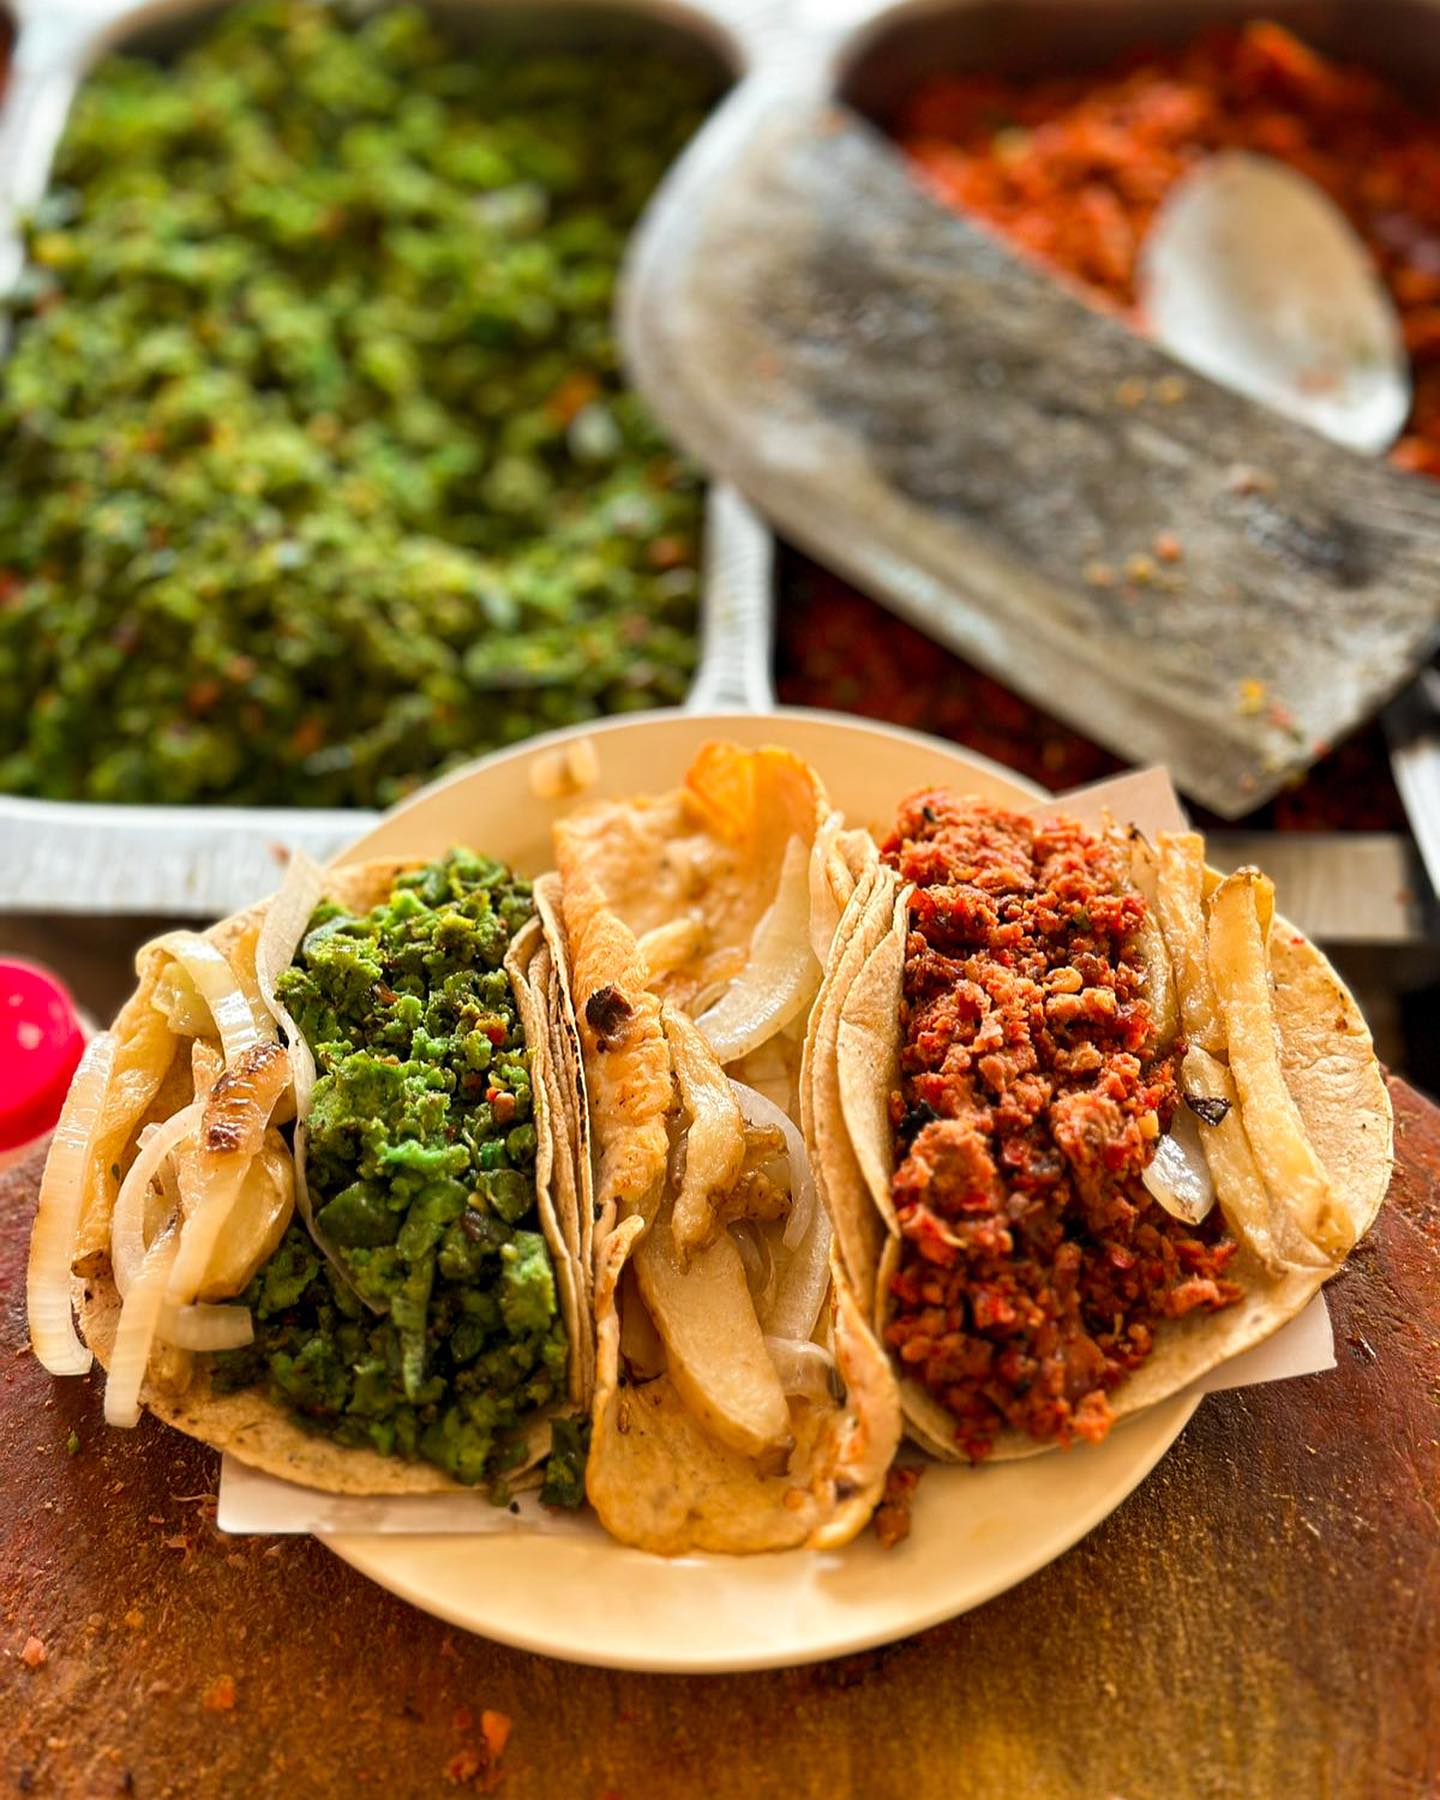 Tacos and freshly prepared food at Ricos Tacos Toluca, Mexico City